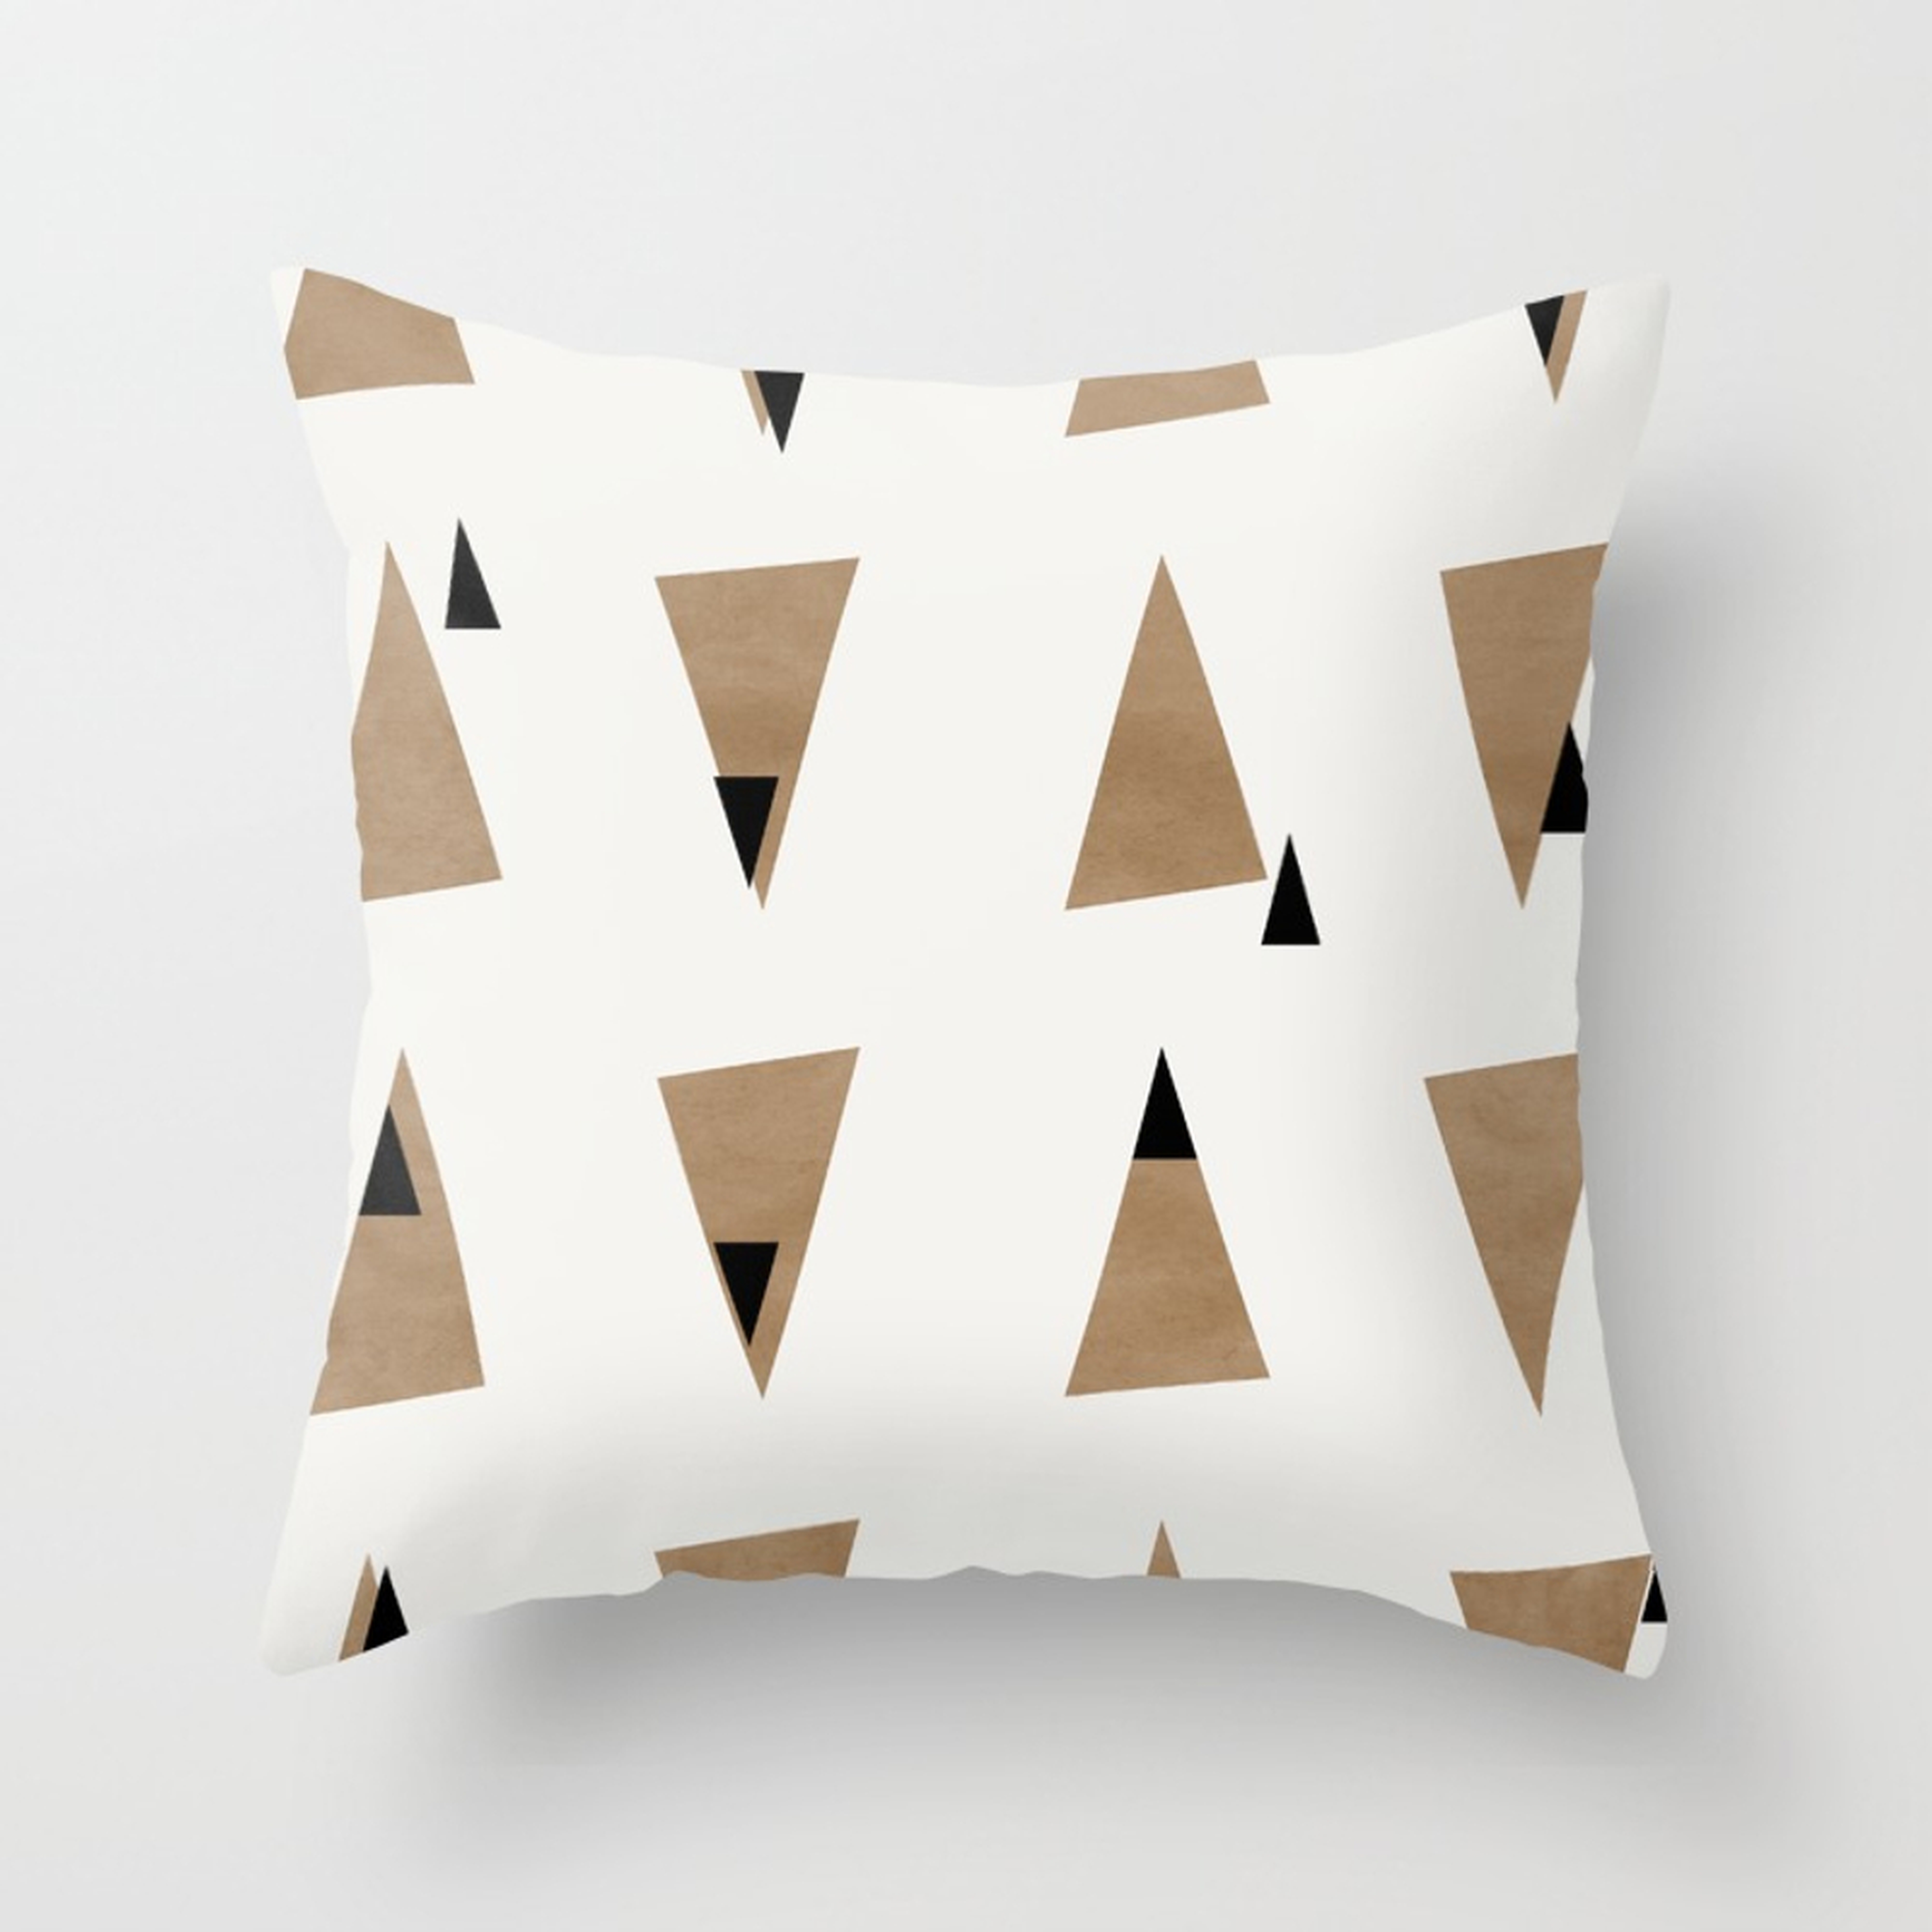 Triangles(gold And Black) Throw Pillow by Georgiana Paraschiv - Cover (20" x 20") With Pillow Insert - Outdoor Pillow - Society6